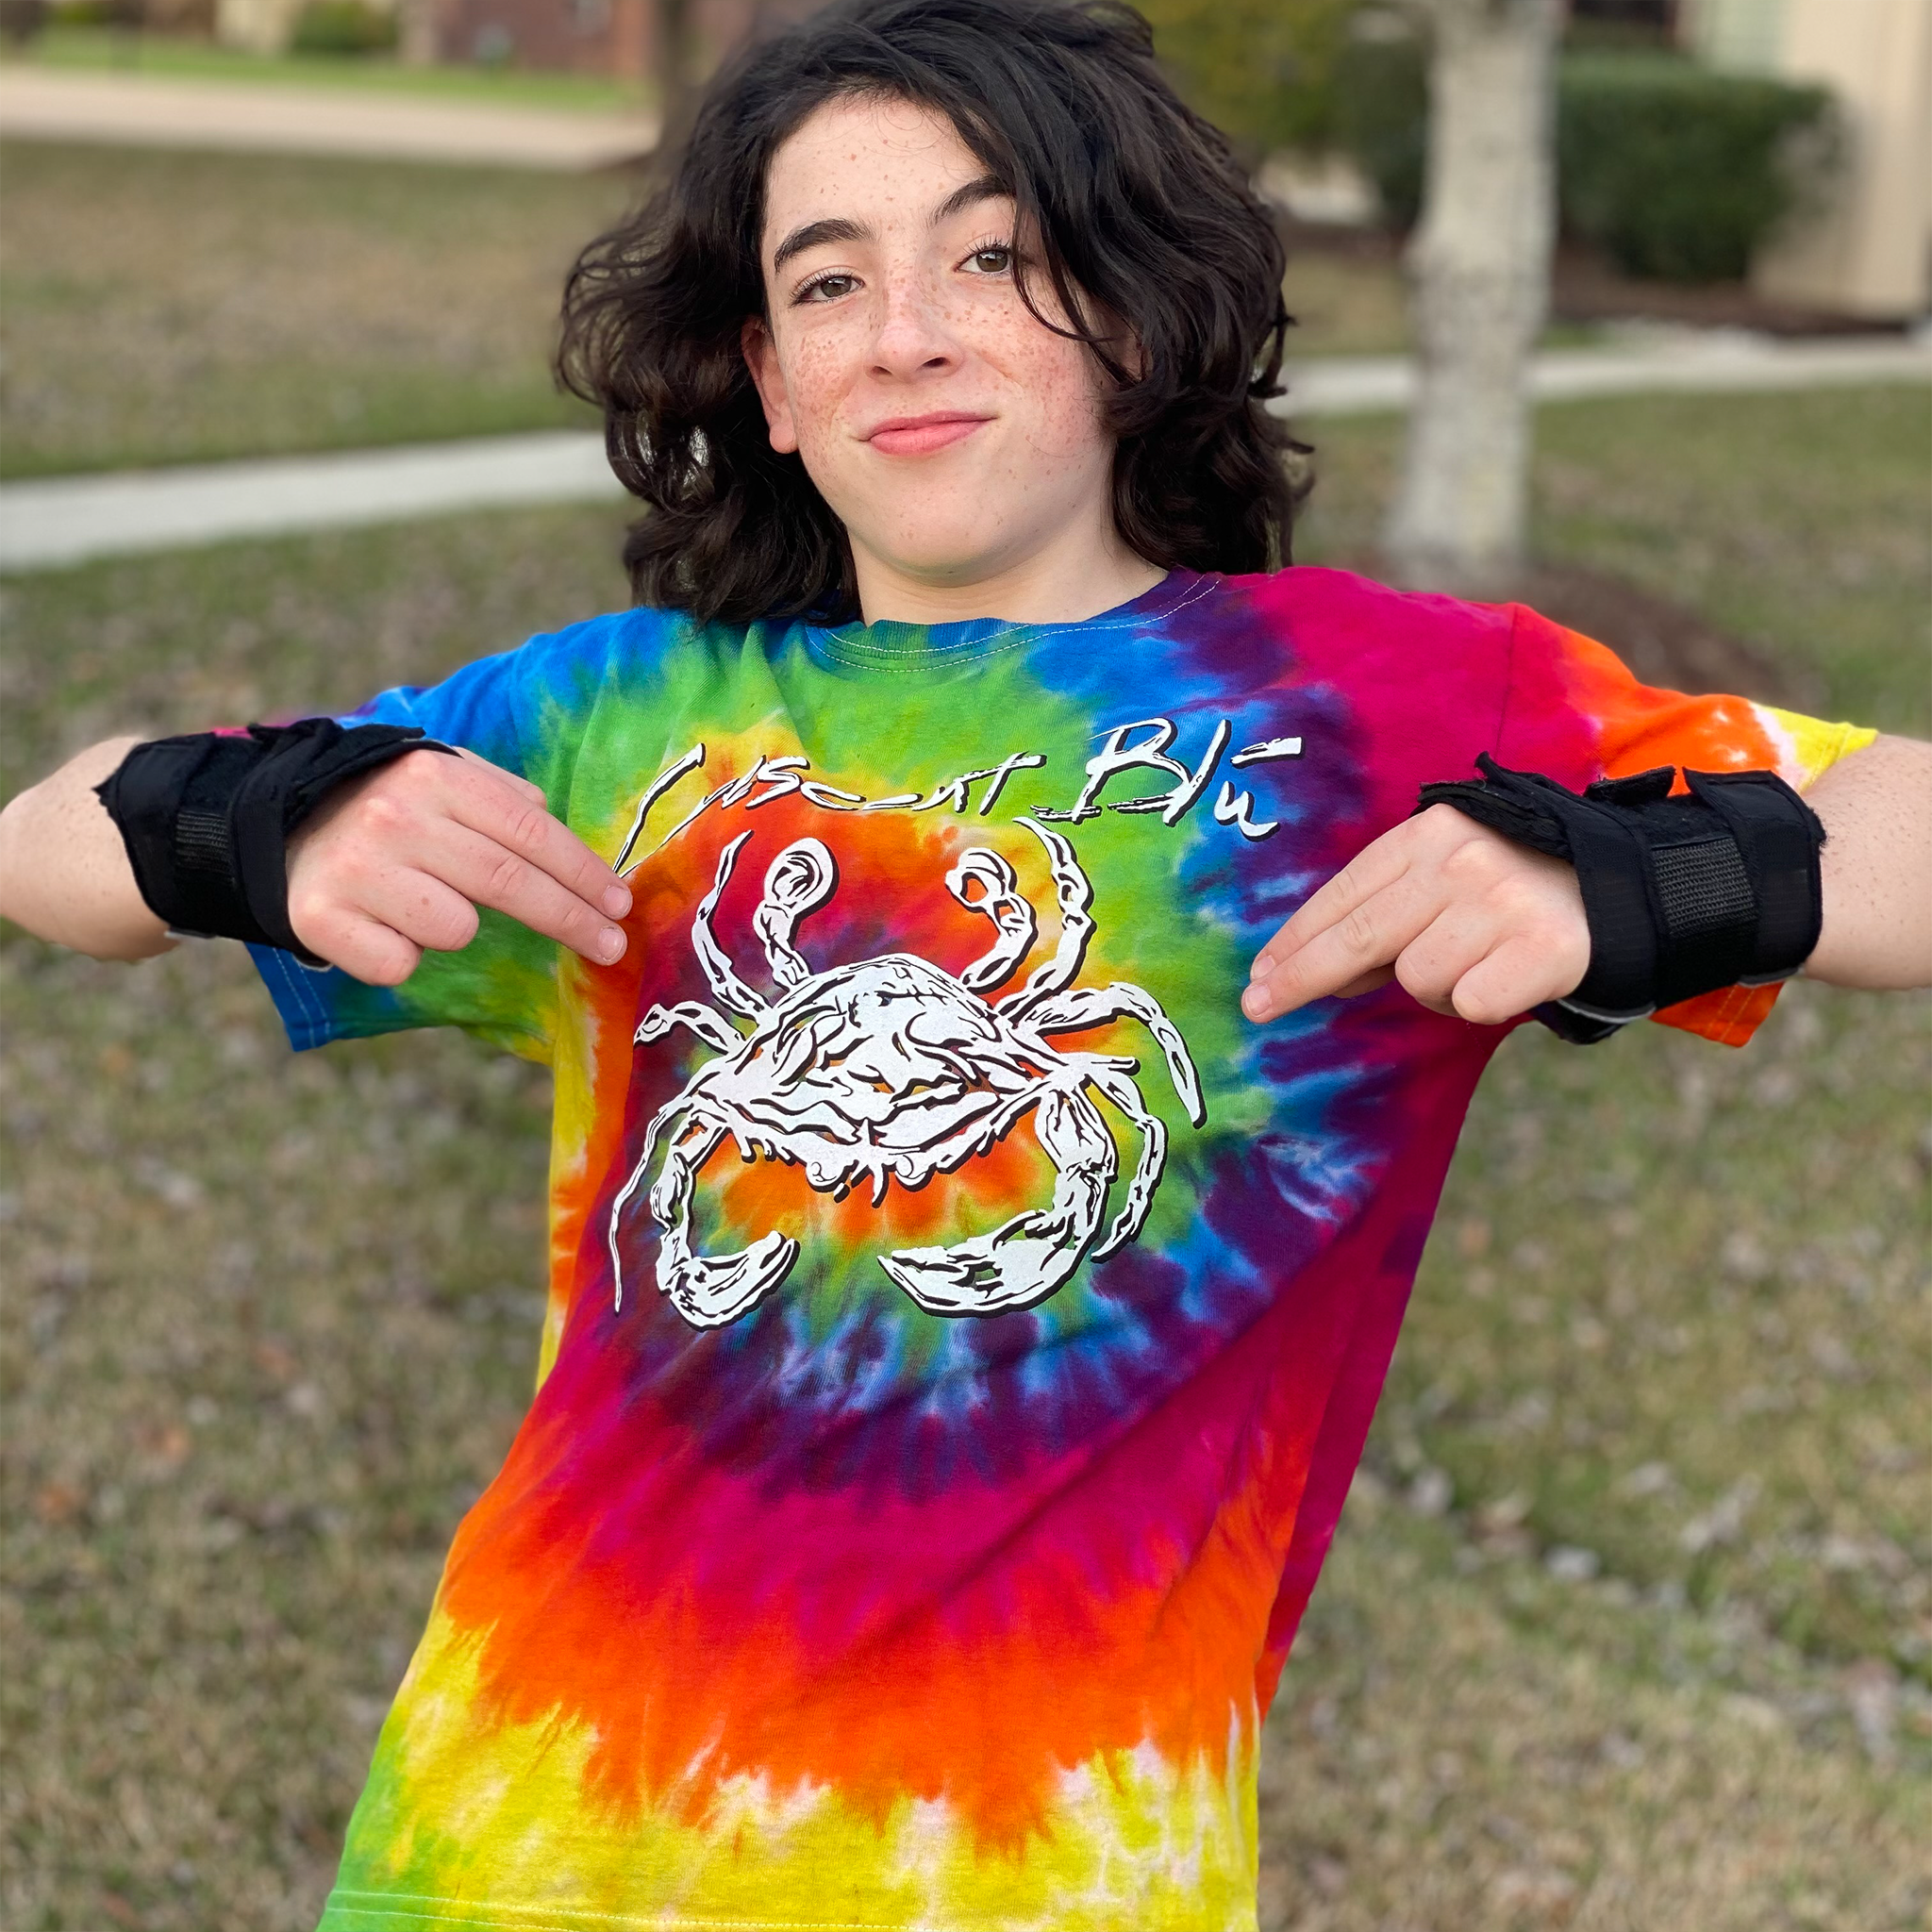 A boy wearing wrist gaurds point to a white crab in the front of his tie dyed tee shirt. 